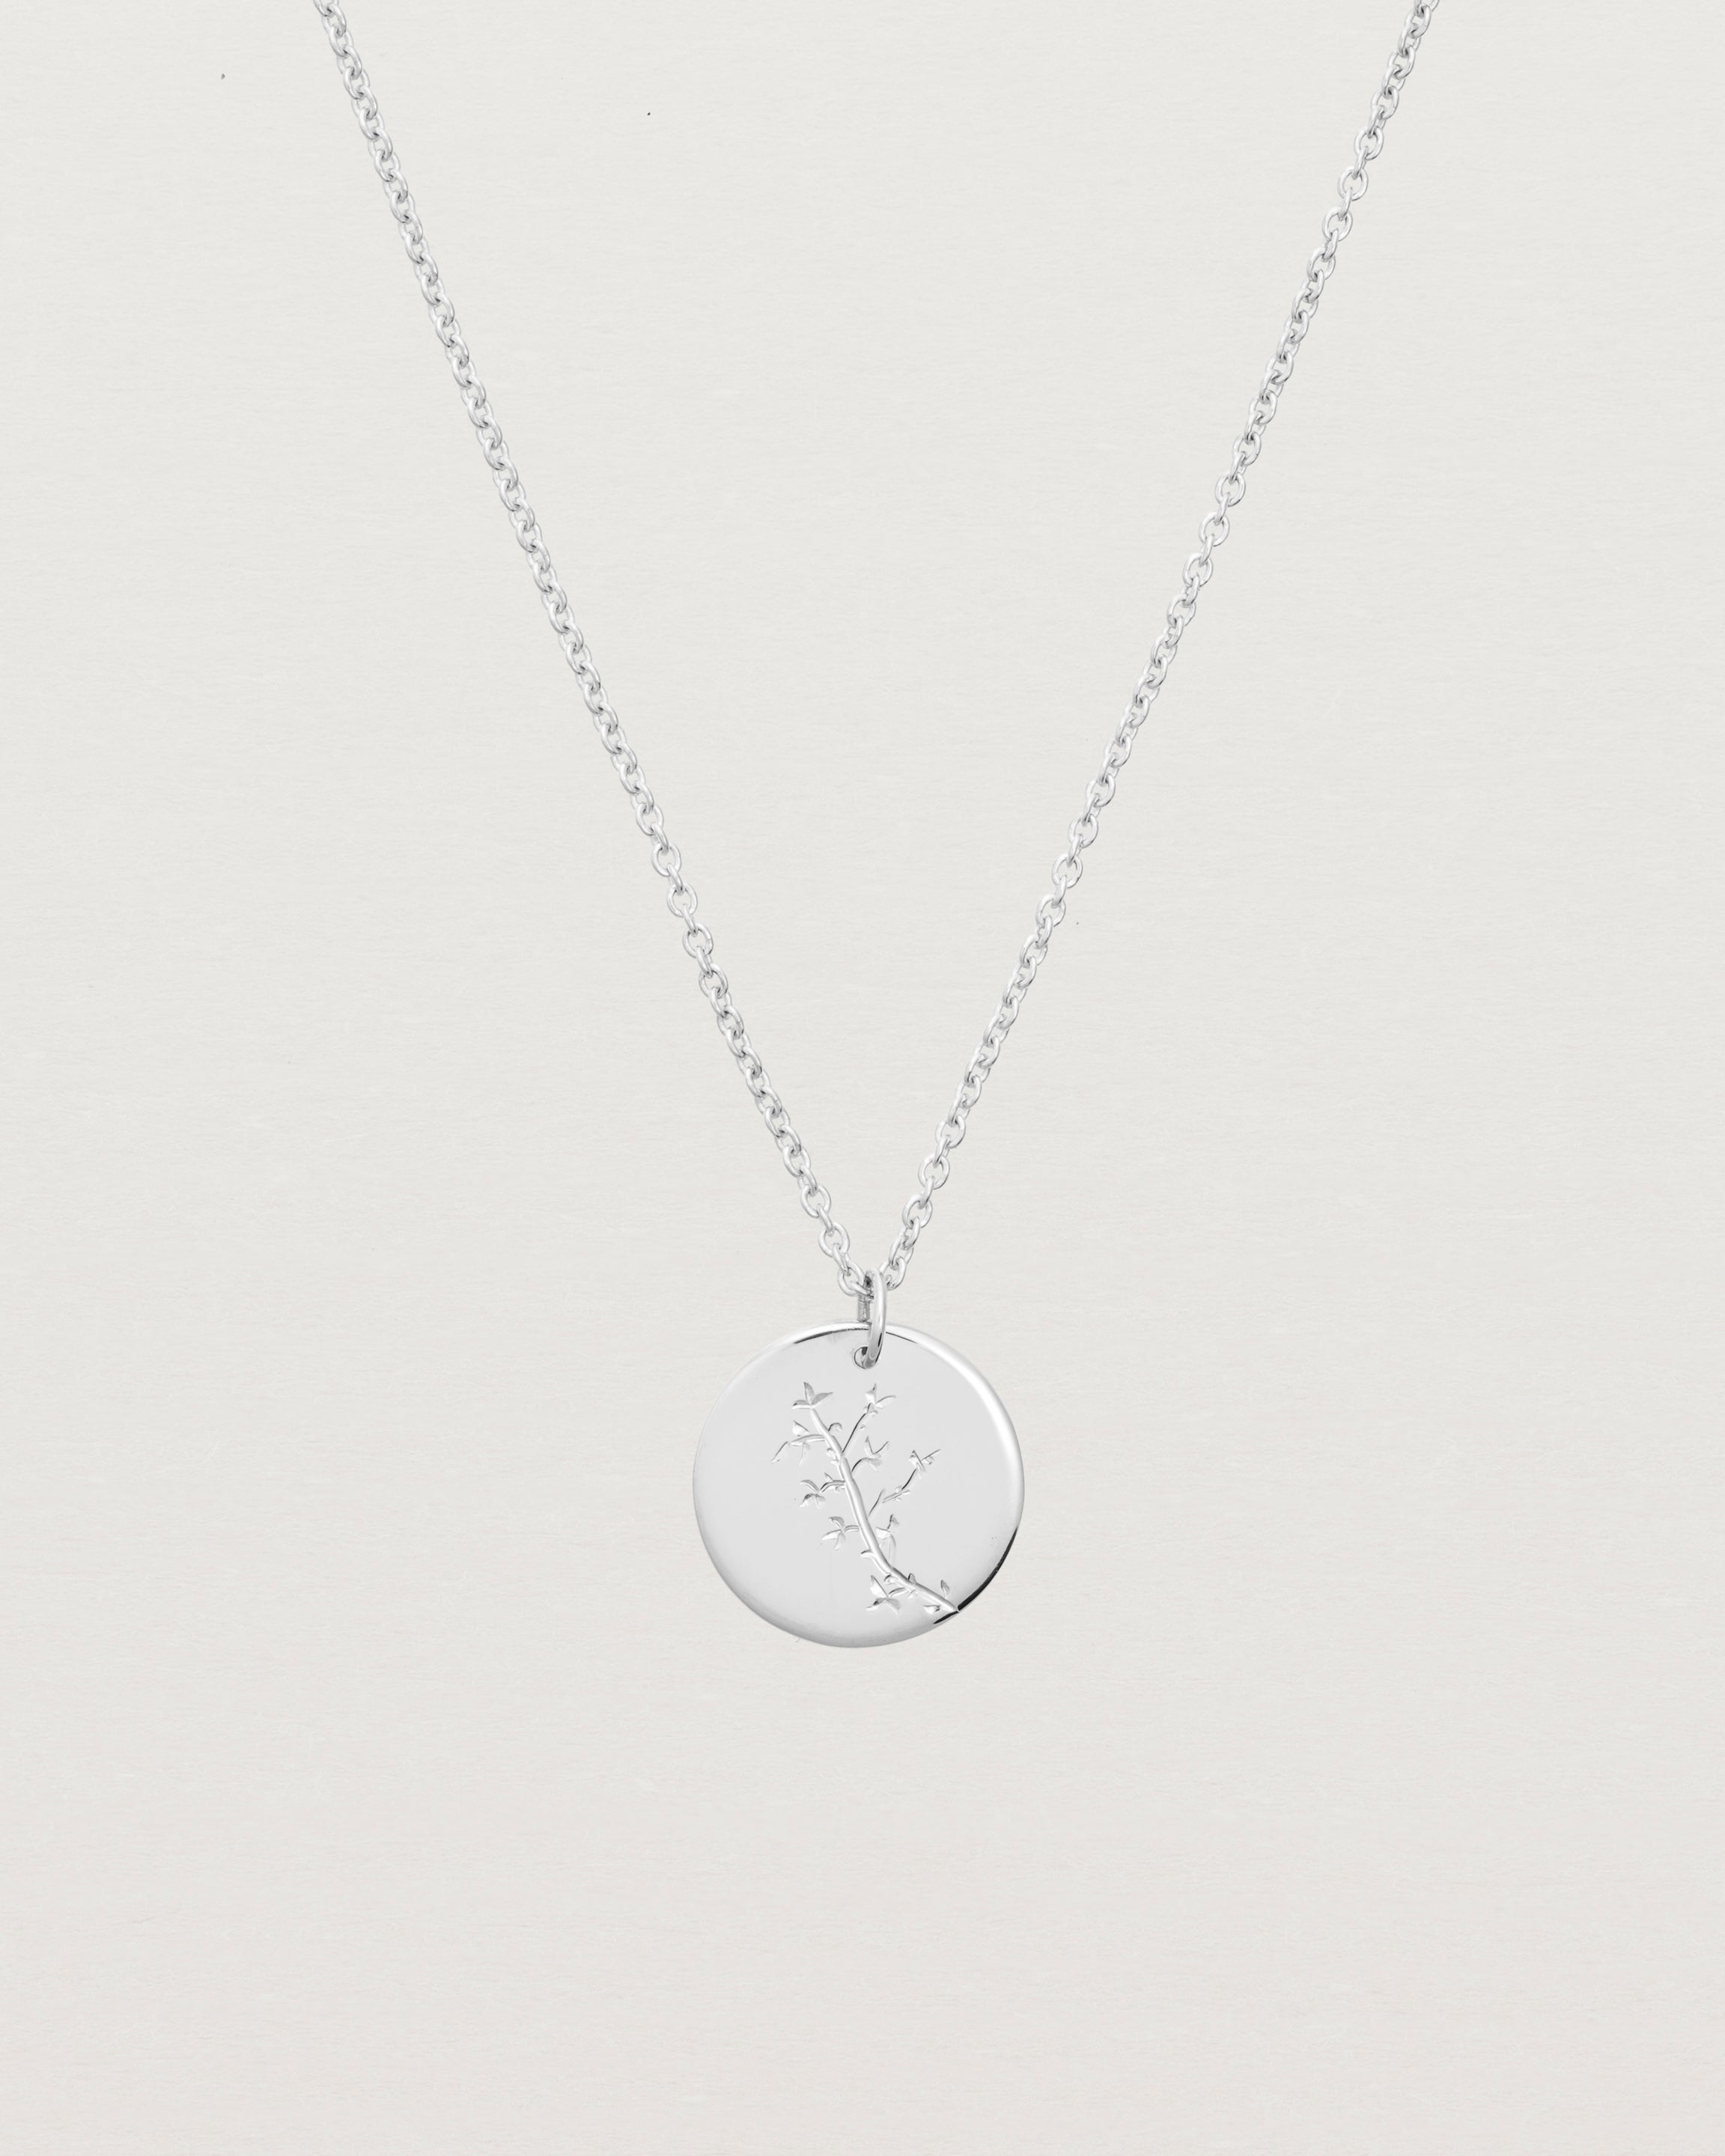 sterling silver engraved necklace with a botanical vine engraving